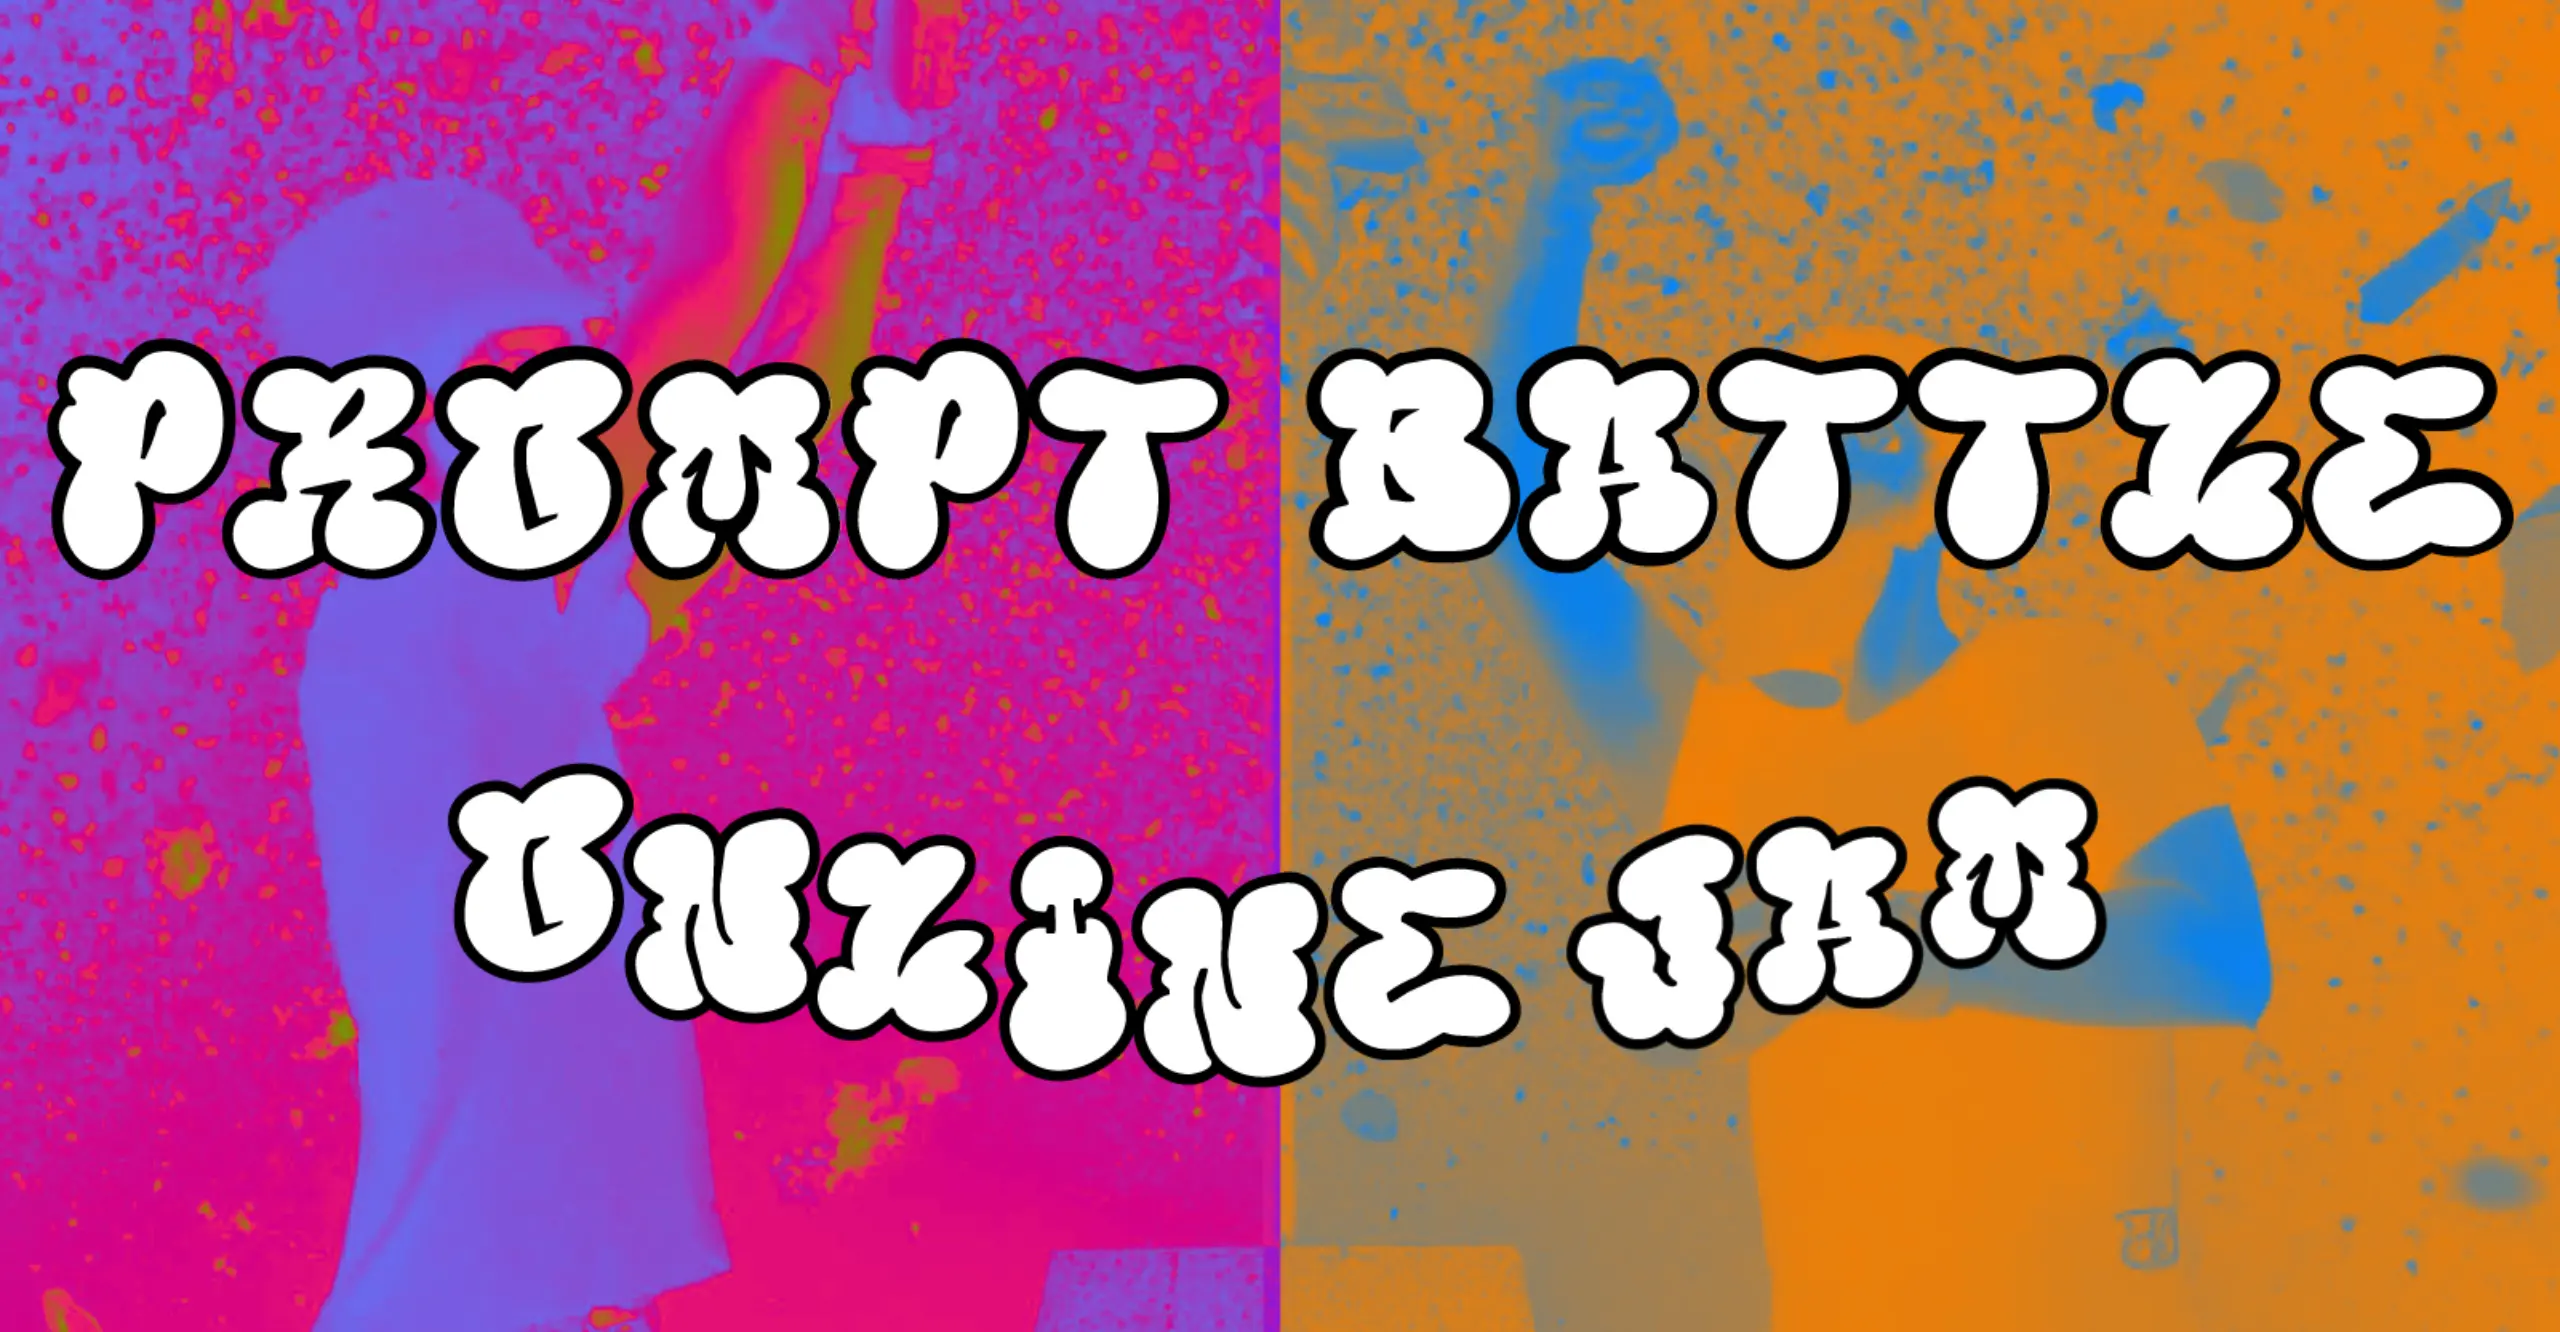 "Prompt Battler Online Jam" written with a cloud shaped white typeface on top of a divided colourful background